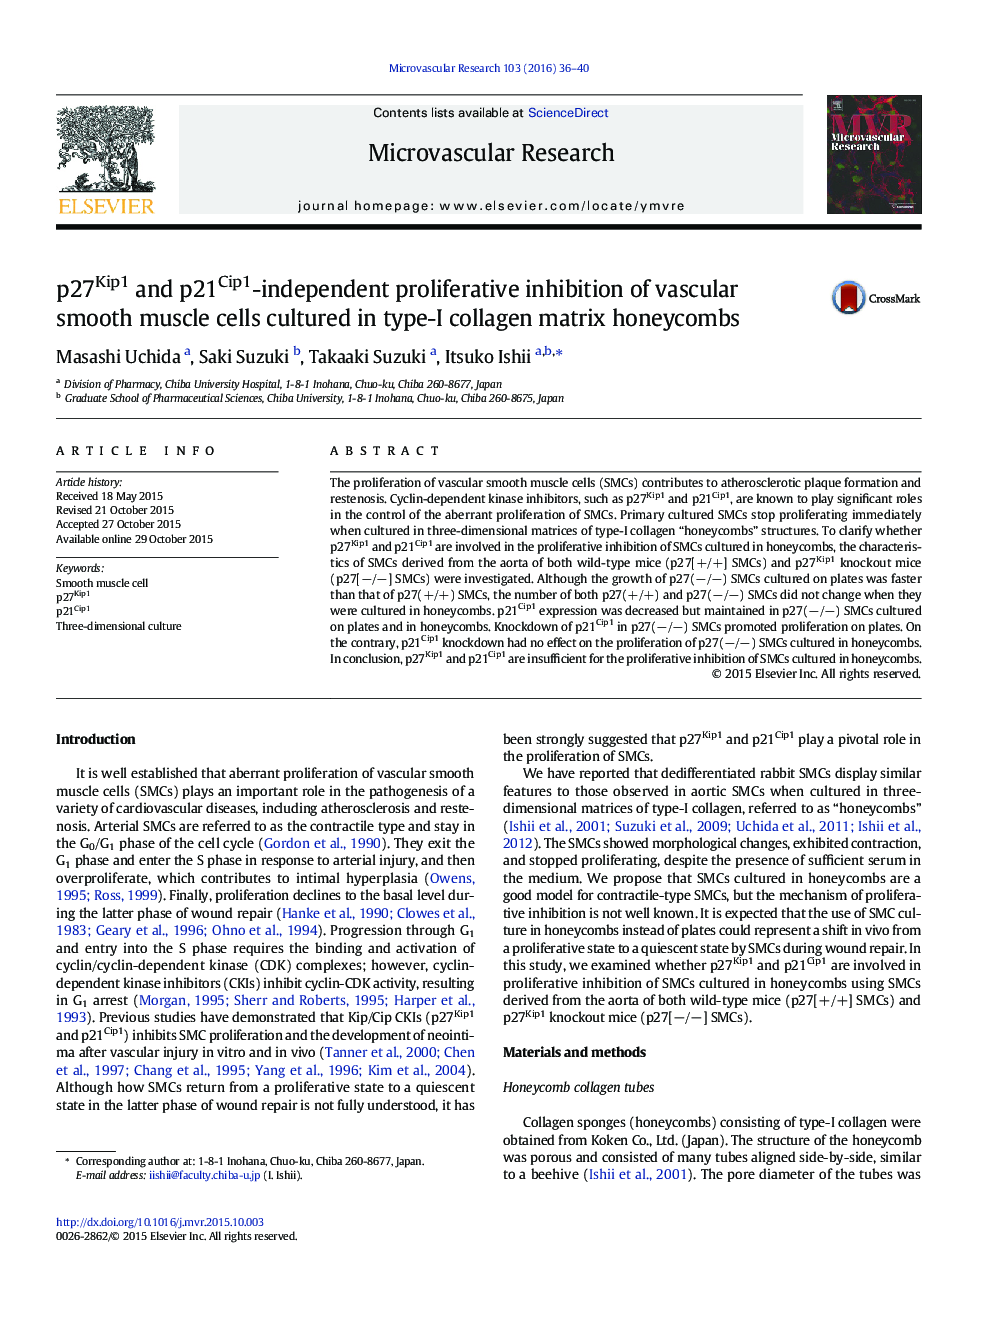 p27Kip1 and p21Cip1-independent proliferative inhibition of vascular smooth muscle cells cultured in type-I collagen matrix honeycombs